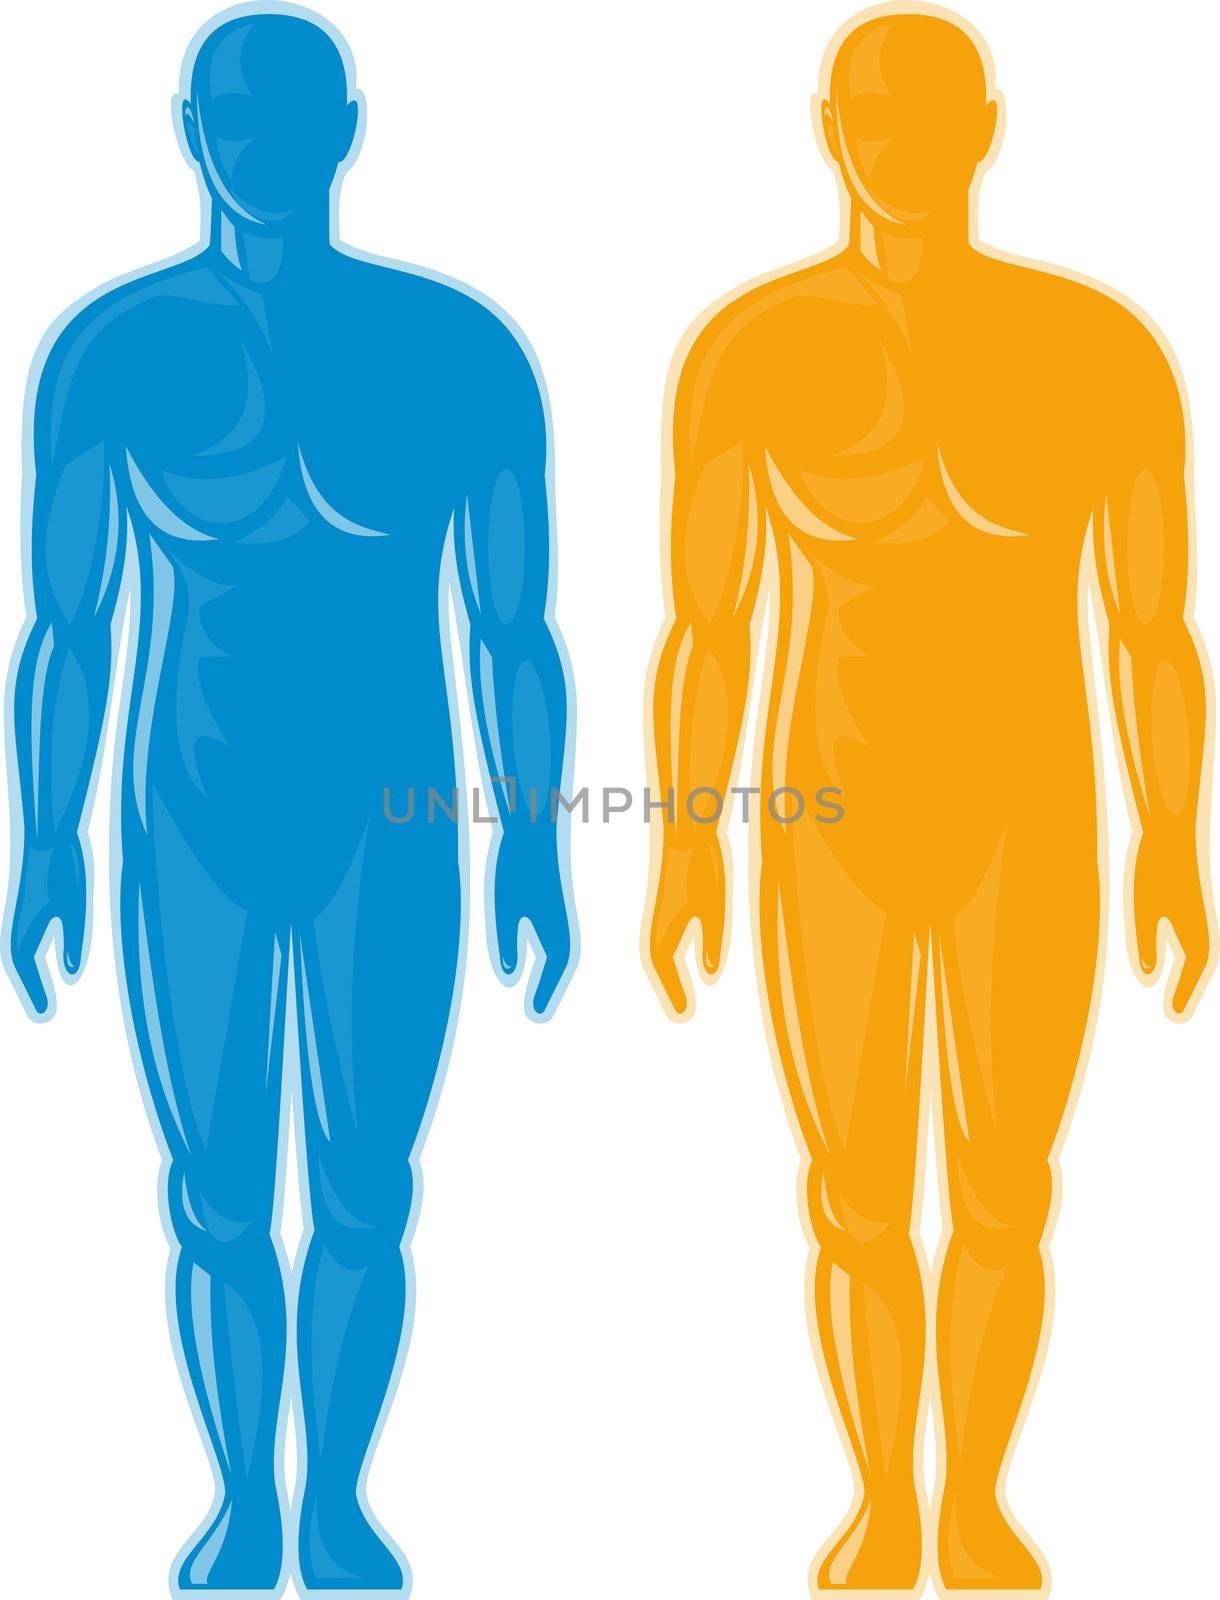 illustration of a Male human anatomy standing front